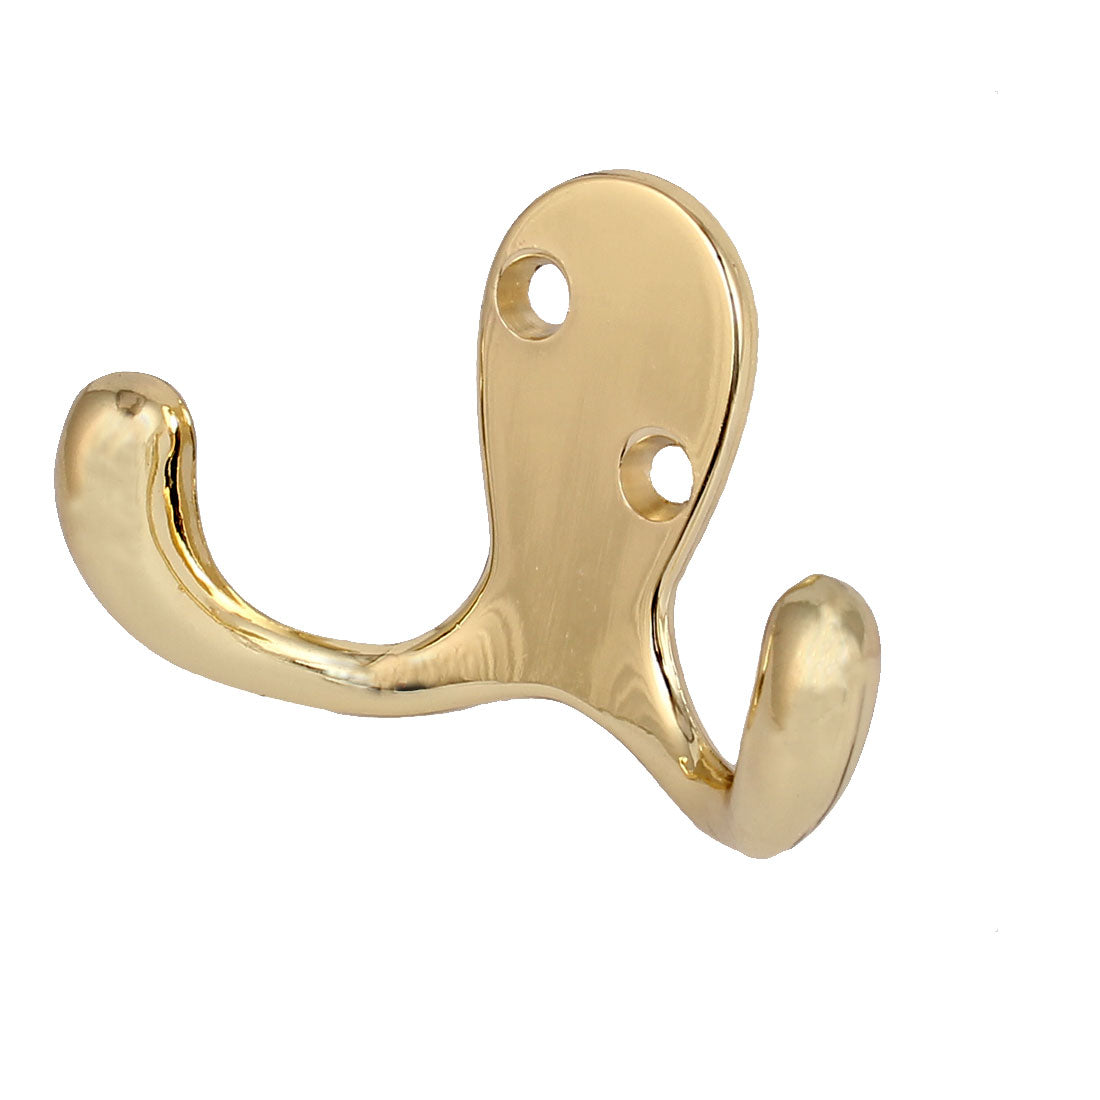 uxcell Uxcell Zinc Alloy Wall Mount Robe Coat Hat Double Hook Hanger Gold Tone